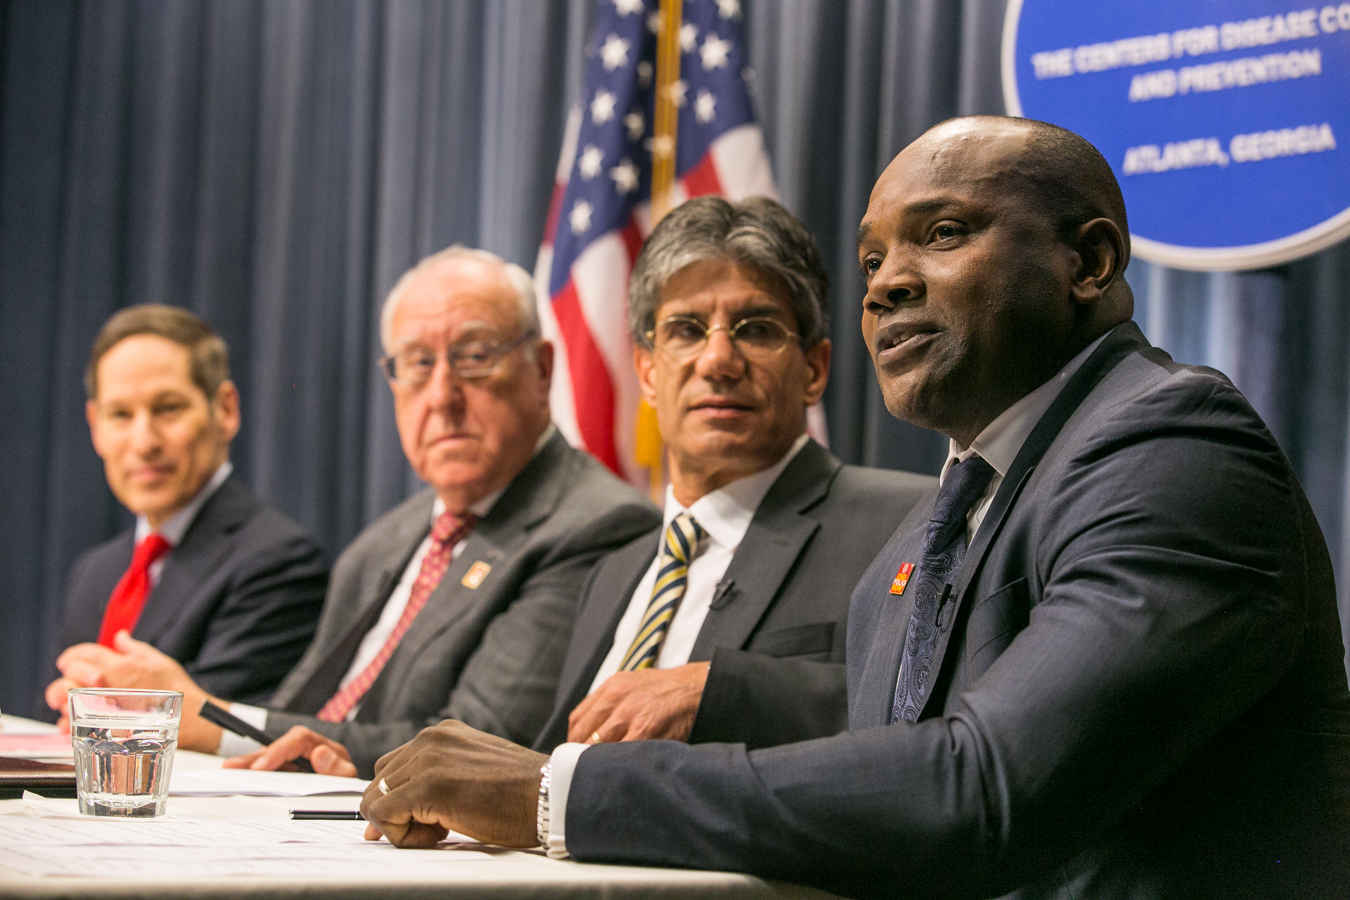 Dennis Ogbe, right, during a World Polio Day panel at the CDC (Alyce Henson& © Rotary International)